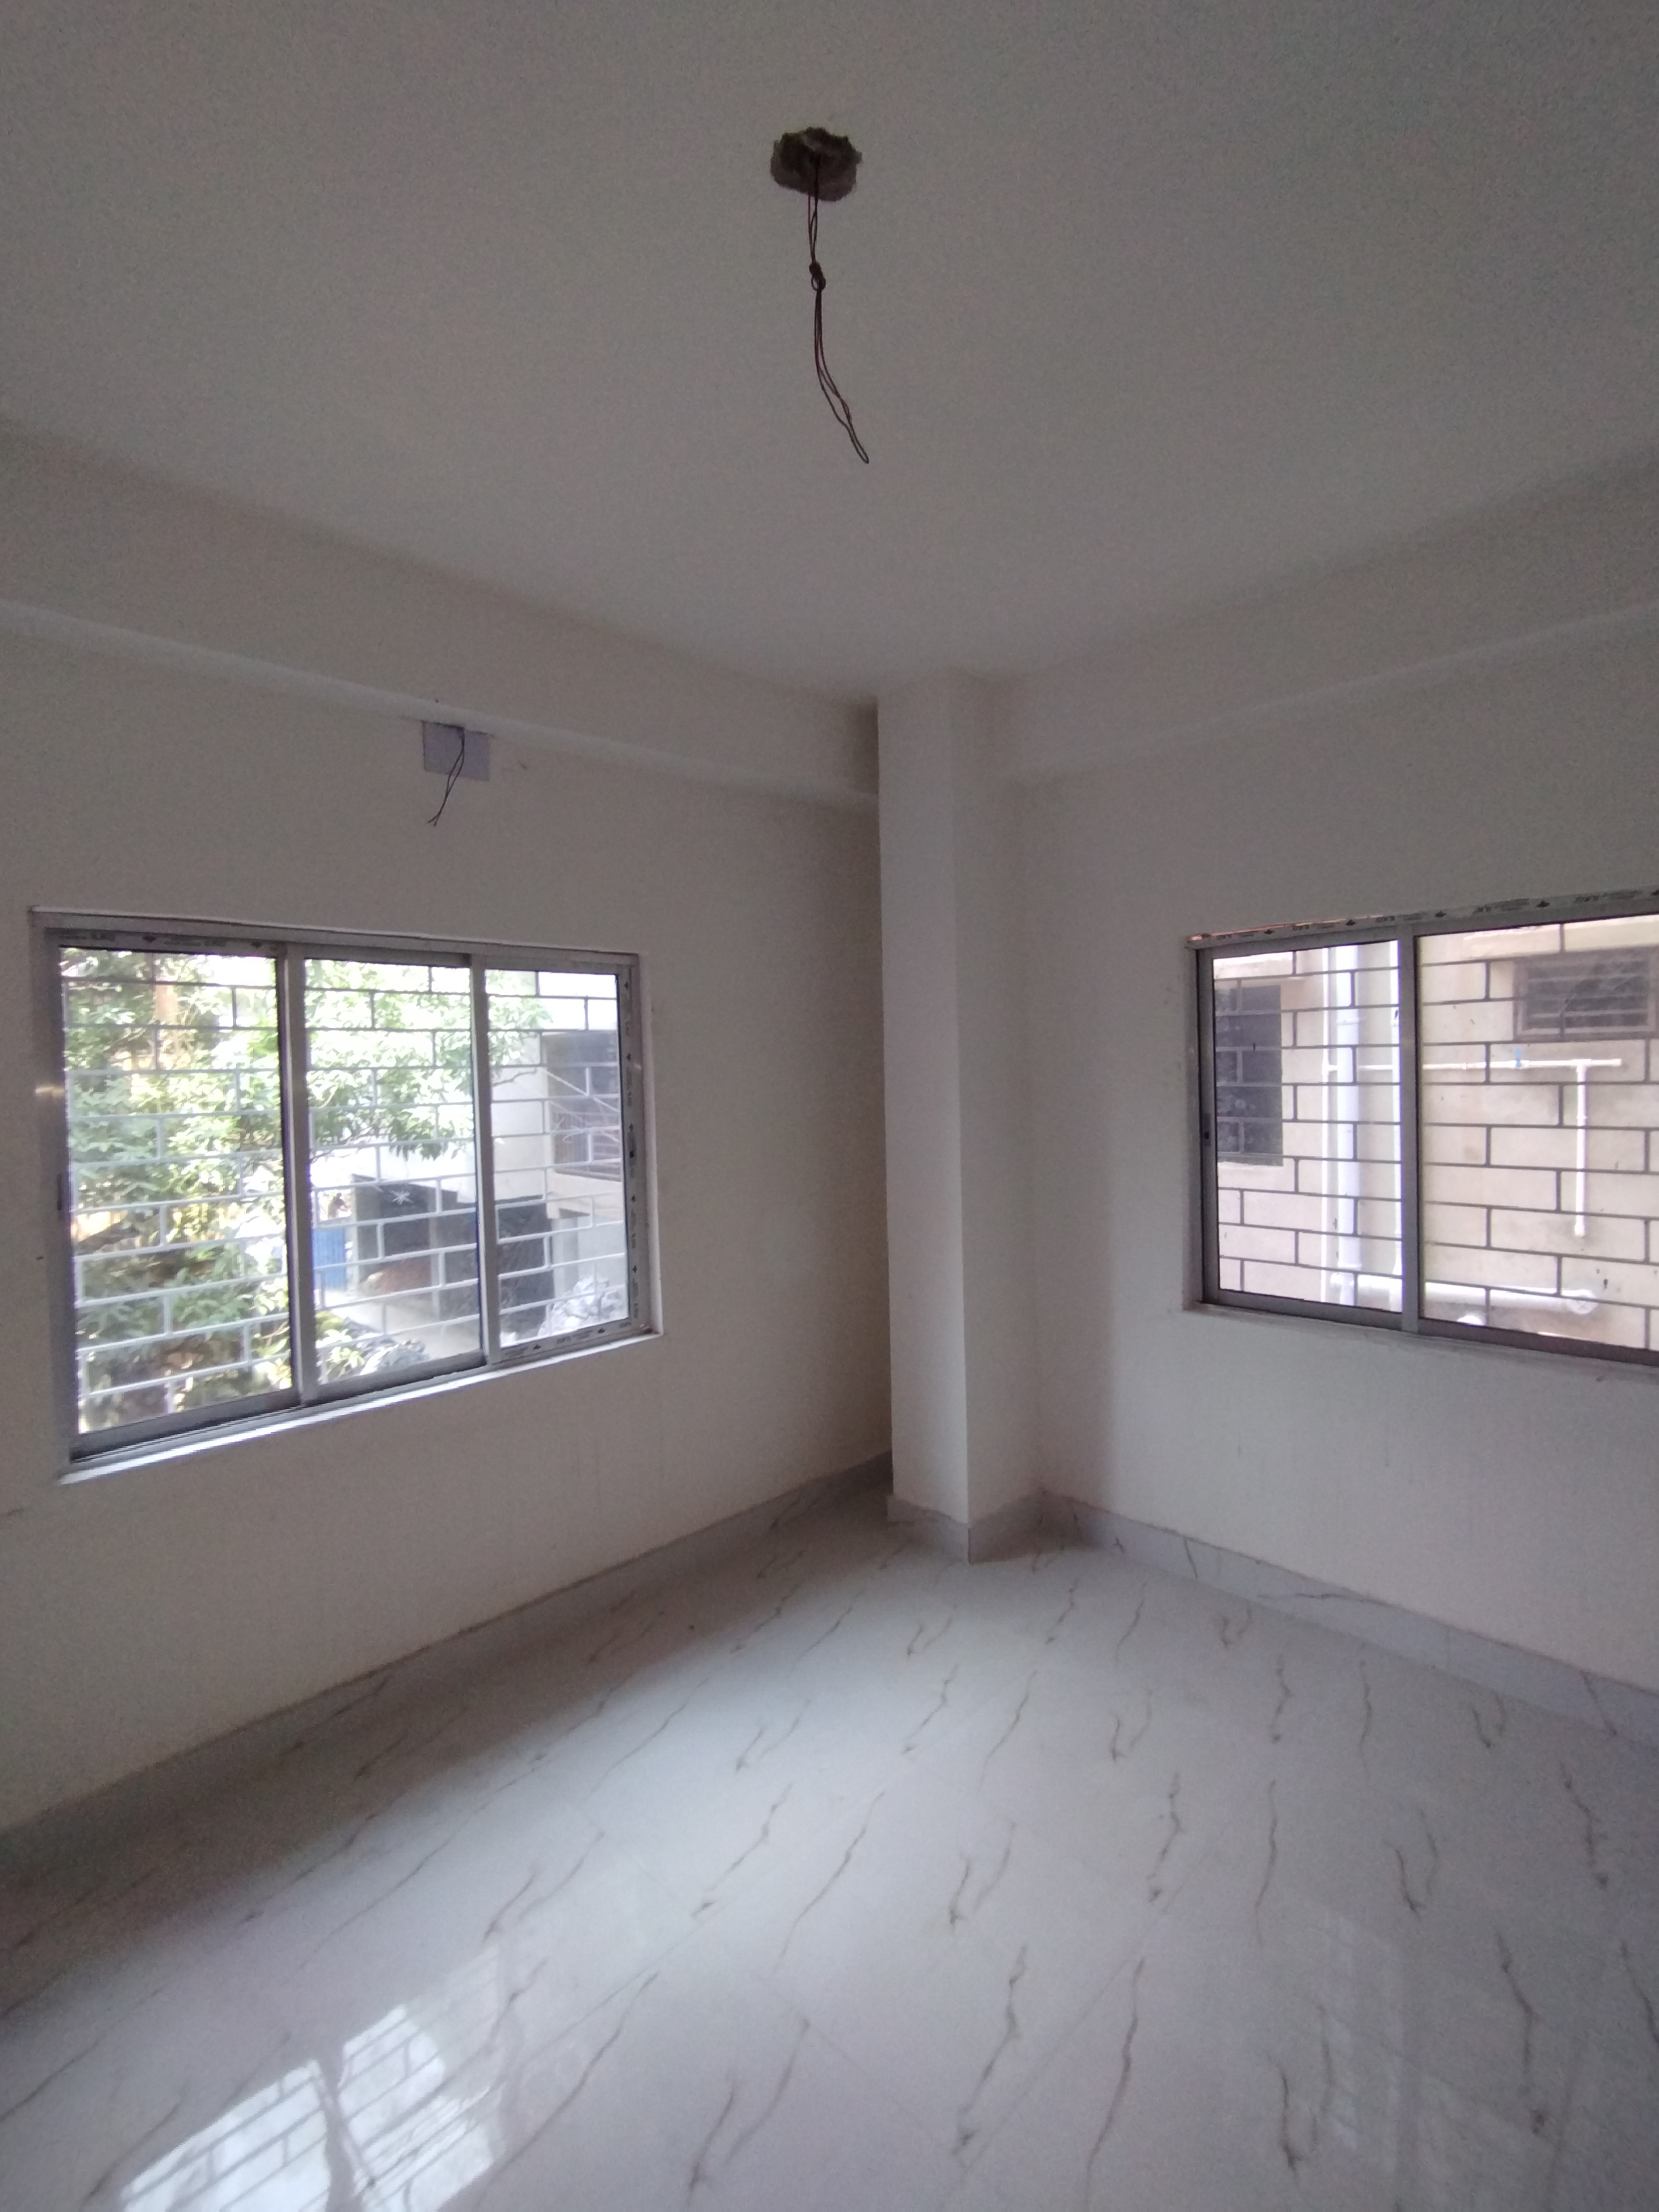 2-bhk-flat-for-sell1664353435